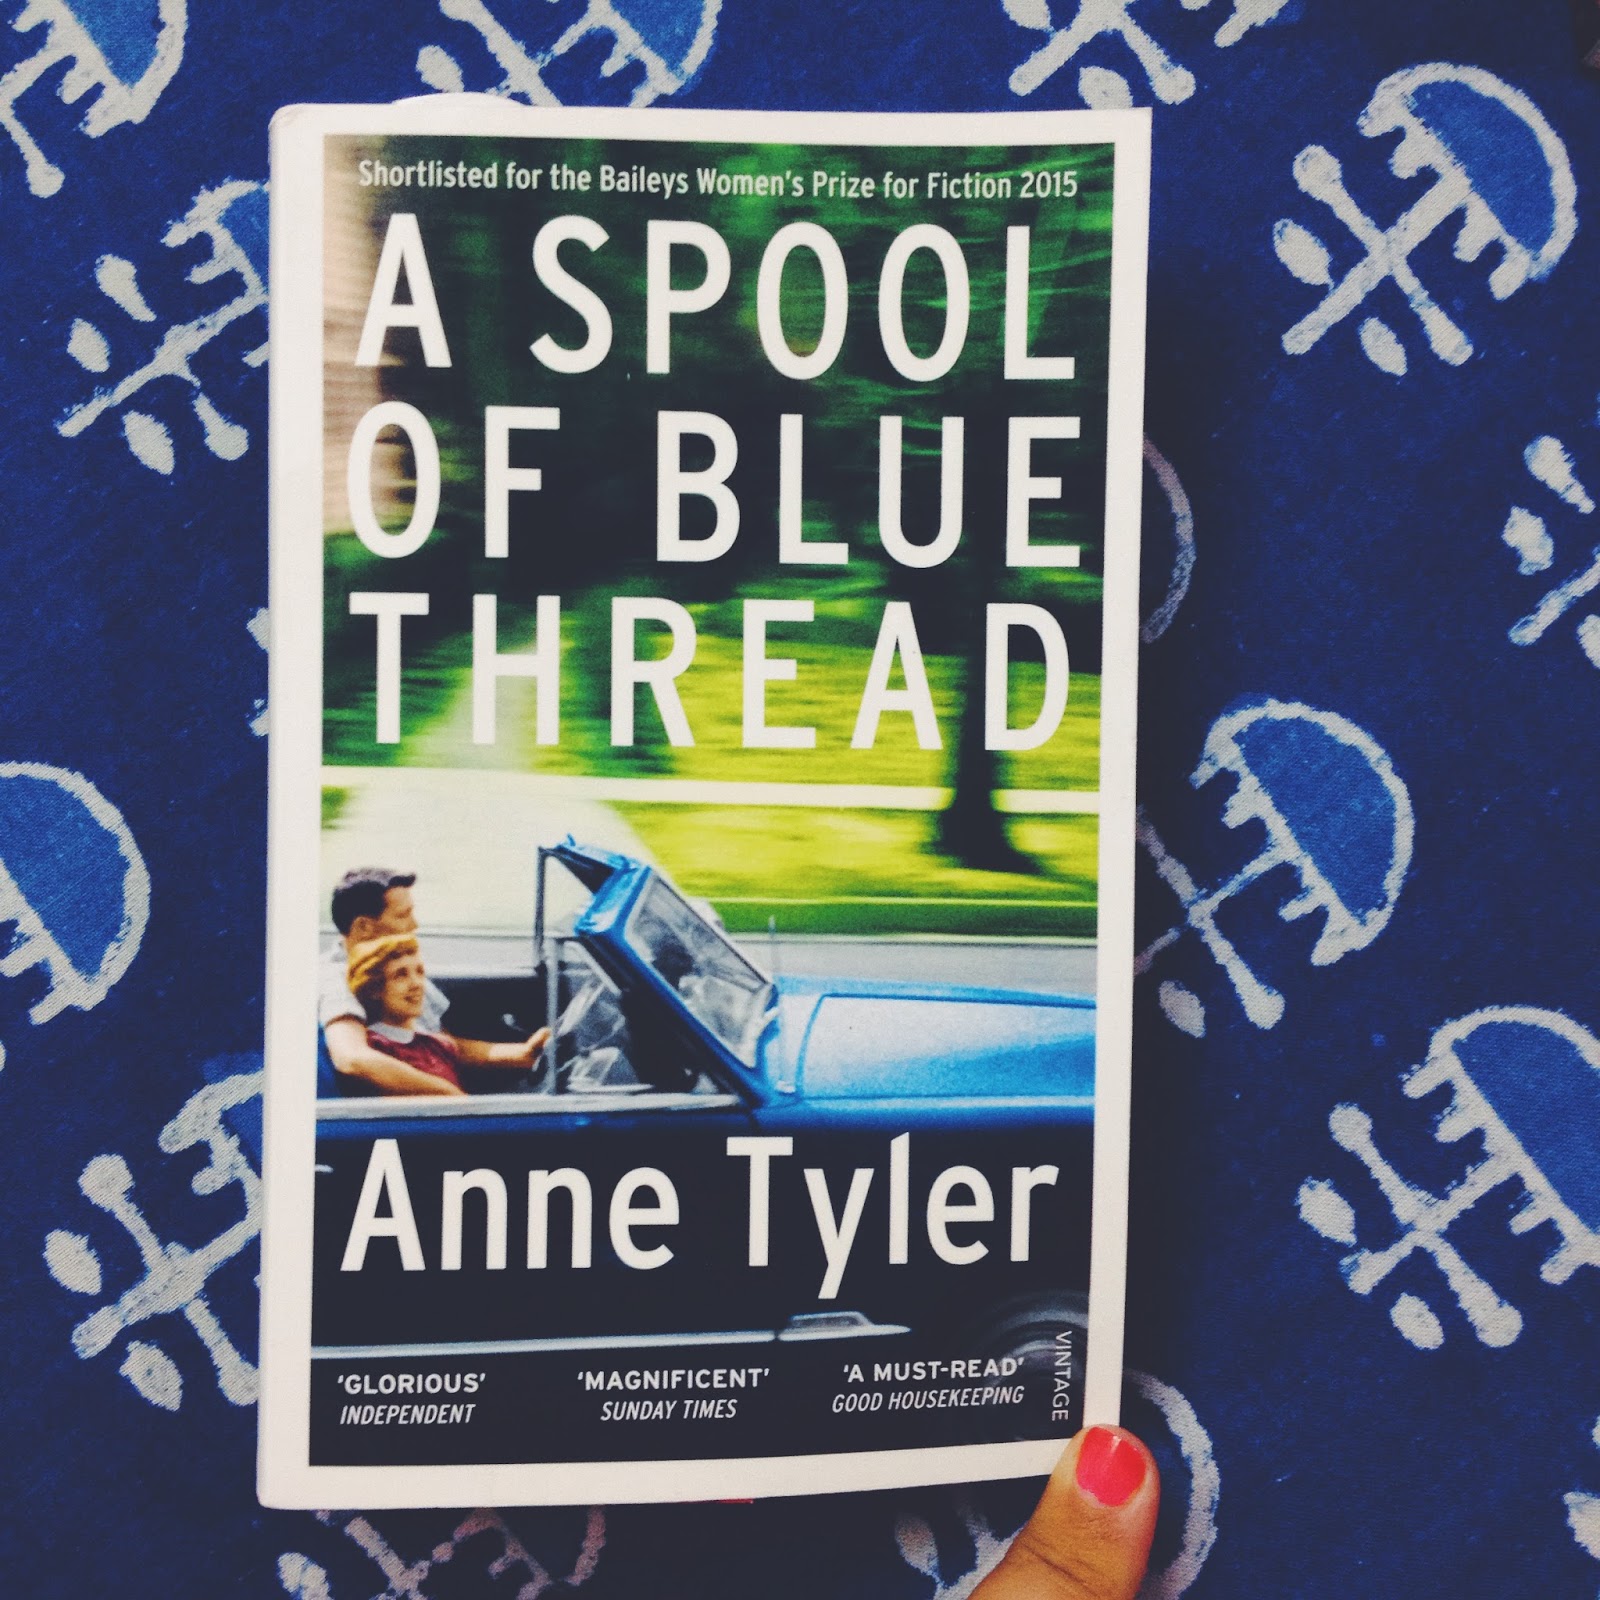 Review: A Spool of Blue Thread by Anne Tyler